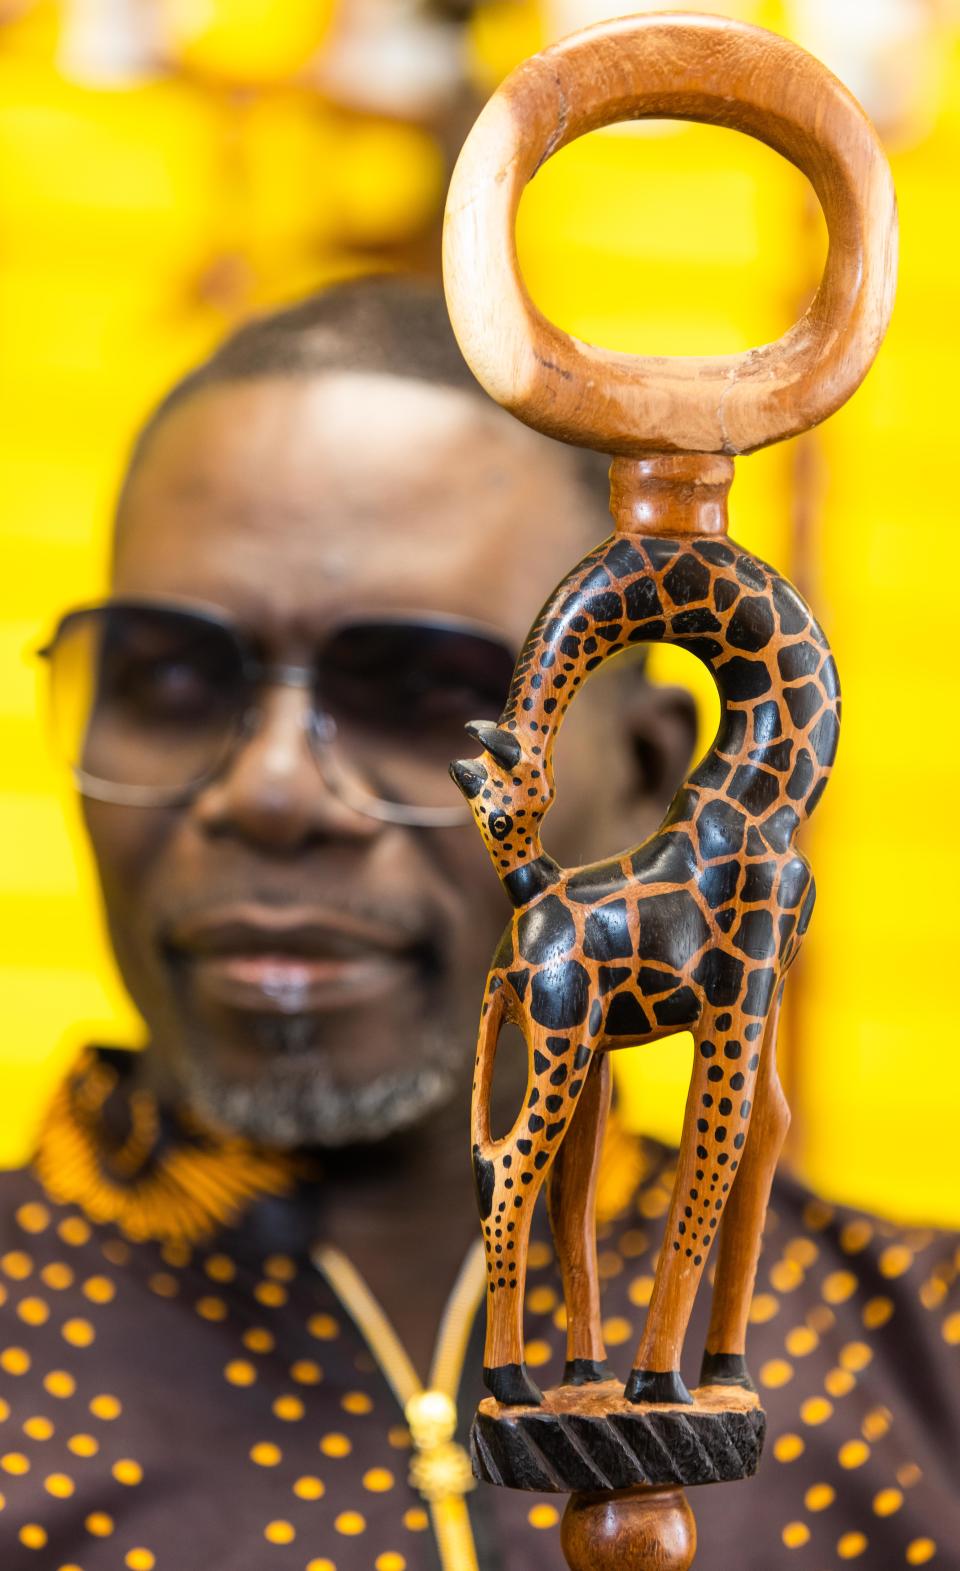 Dunstan Kalumba recently opened Abantu African Consignment Outlet, located at 3131 SW College Road, Suite 406, in Ocala. He shows off one of the canes that he sells in the store. They are made in Africa. The store is open Monday to Friday, 10 a.m. to 6 p.m., and Saturday 10 a.m. to 7 p.m. It also caters African-style food for events and festivals.